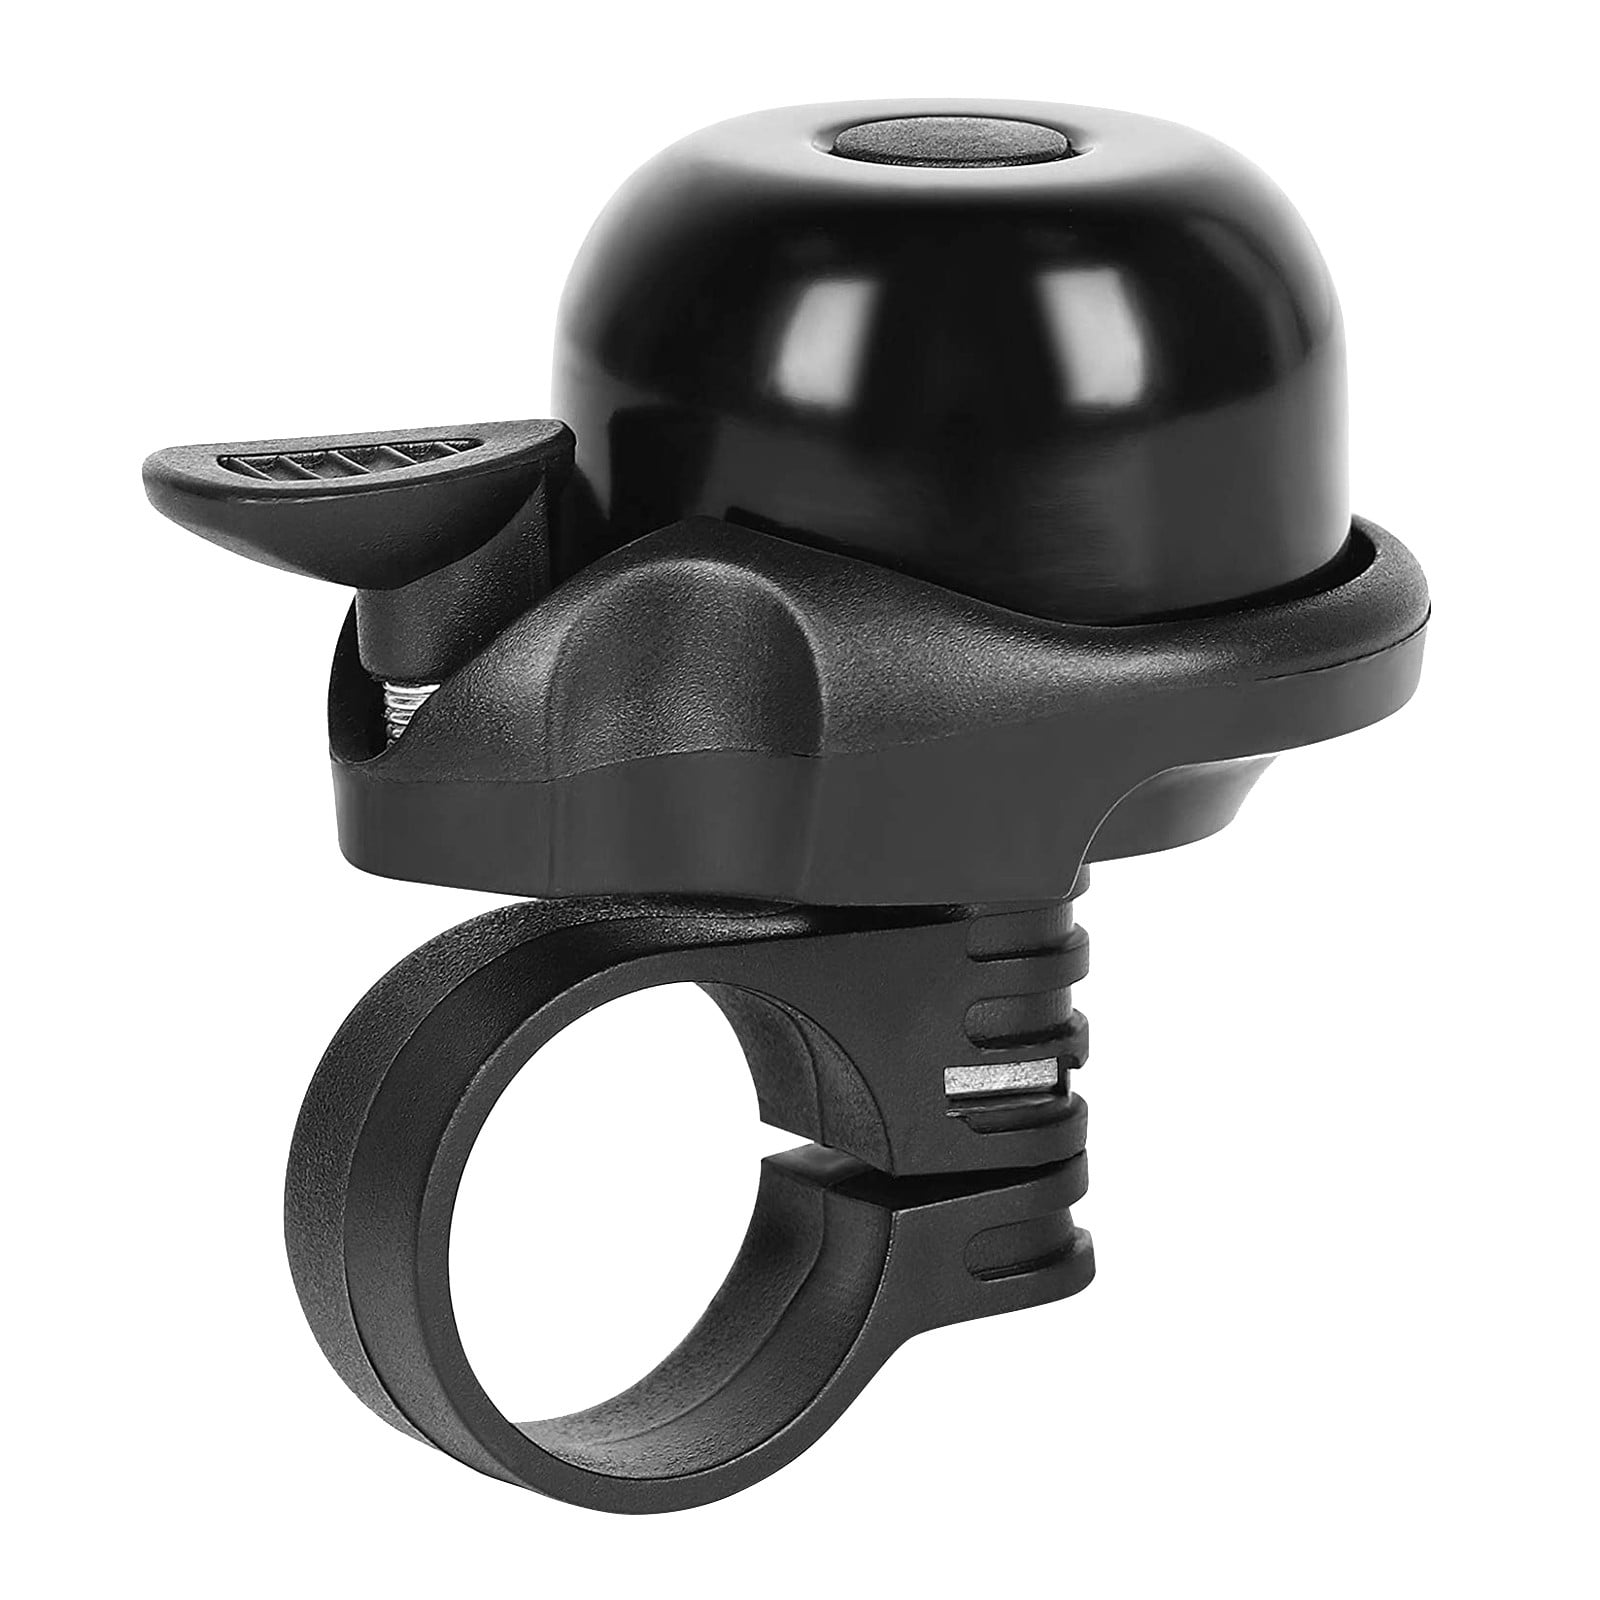 Metal Ring Handlebar Bell Alarm Horn Sound for Bike Bicycle Cycling Black HOT 